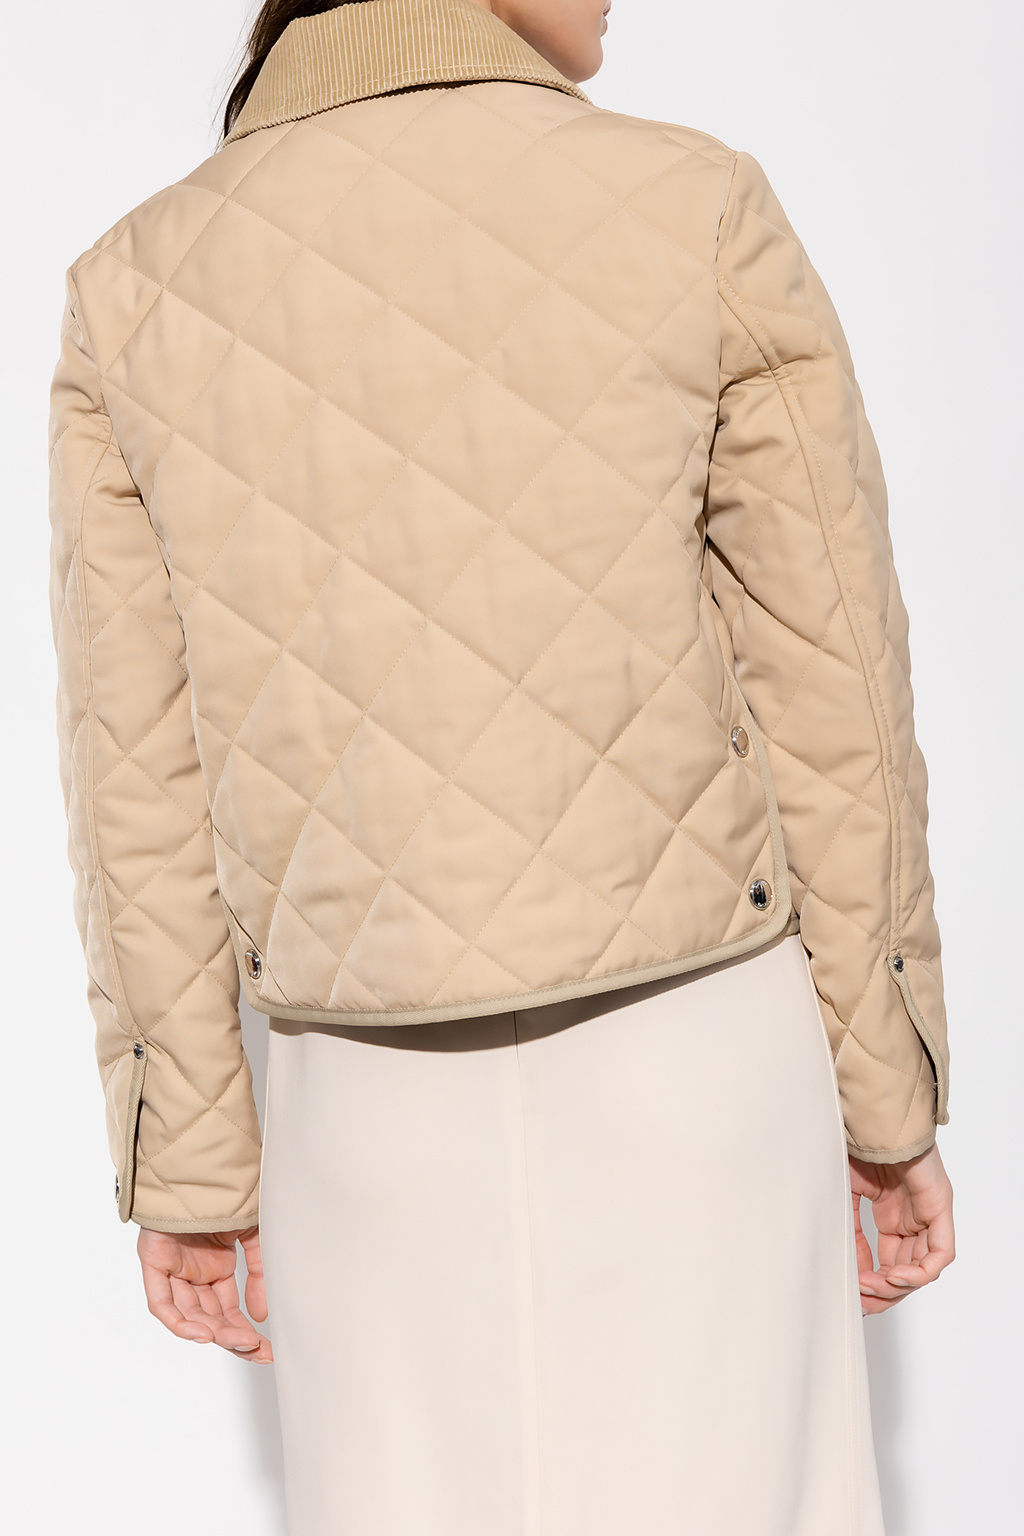 Burberry ‘Lanford’ quilted jacket